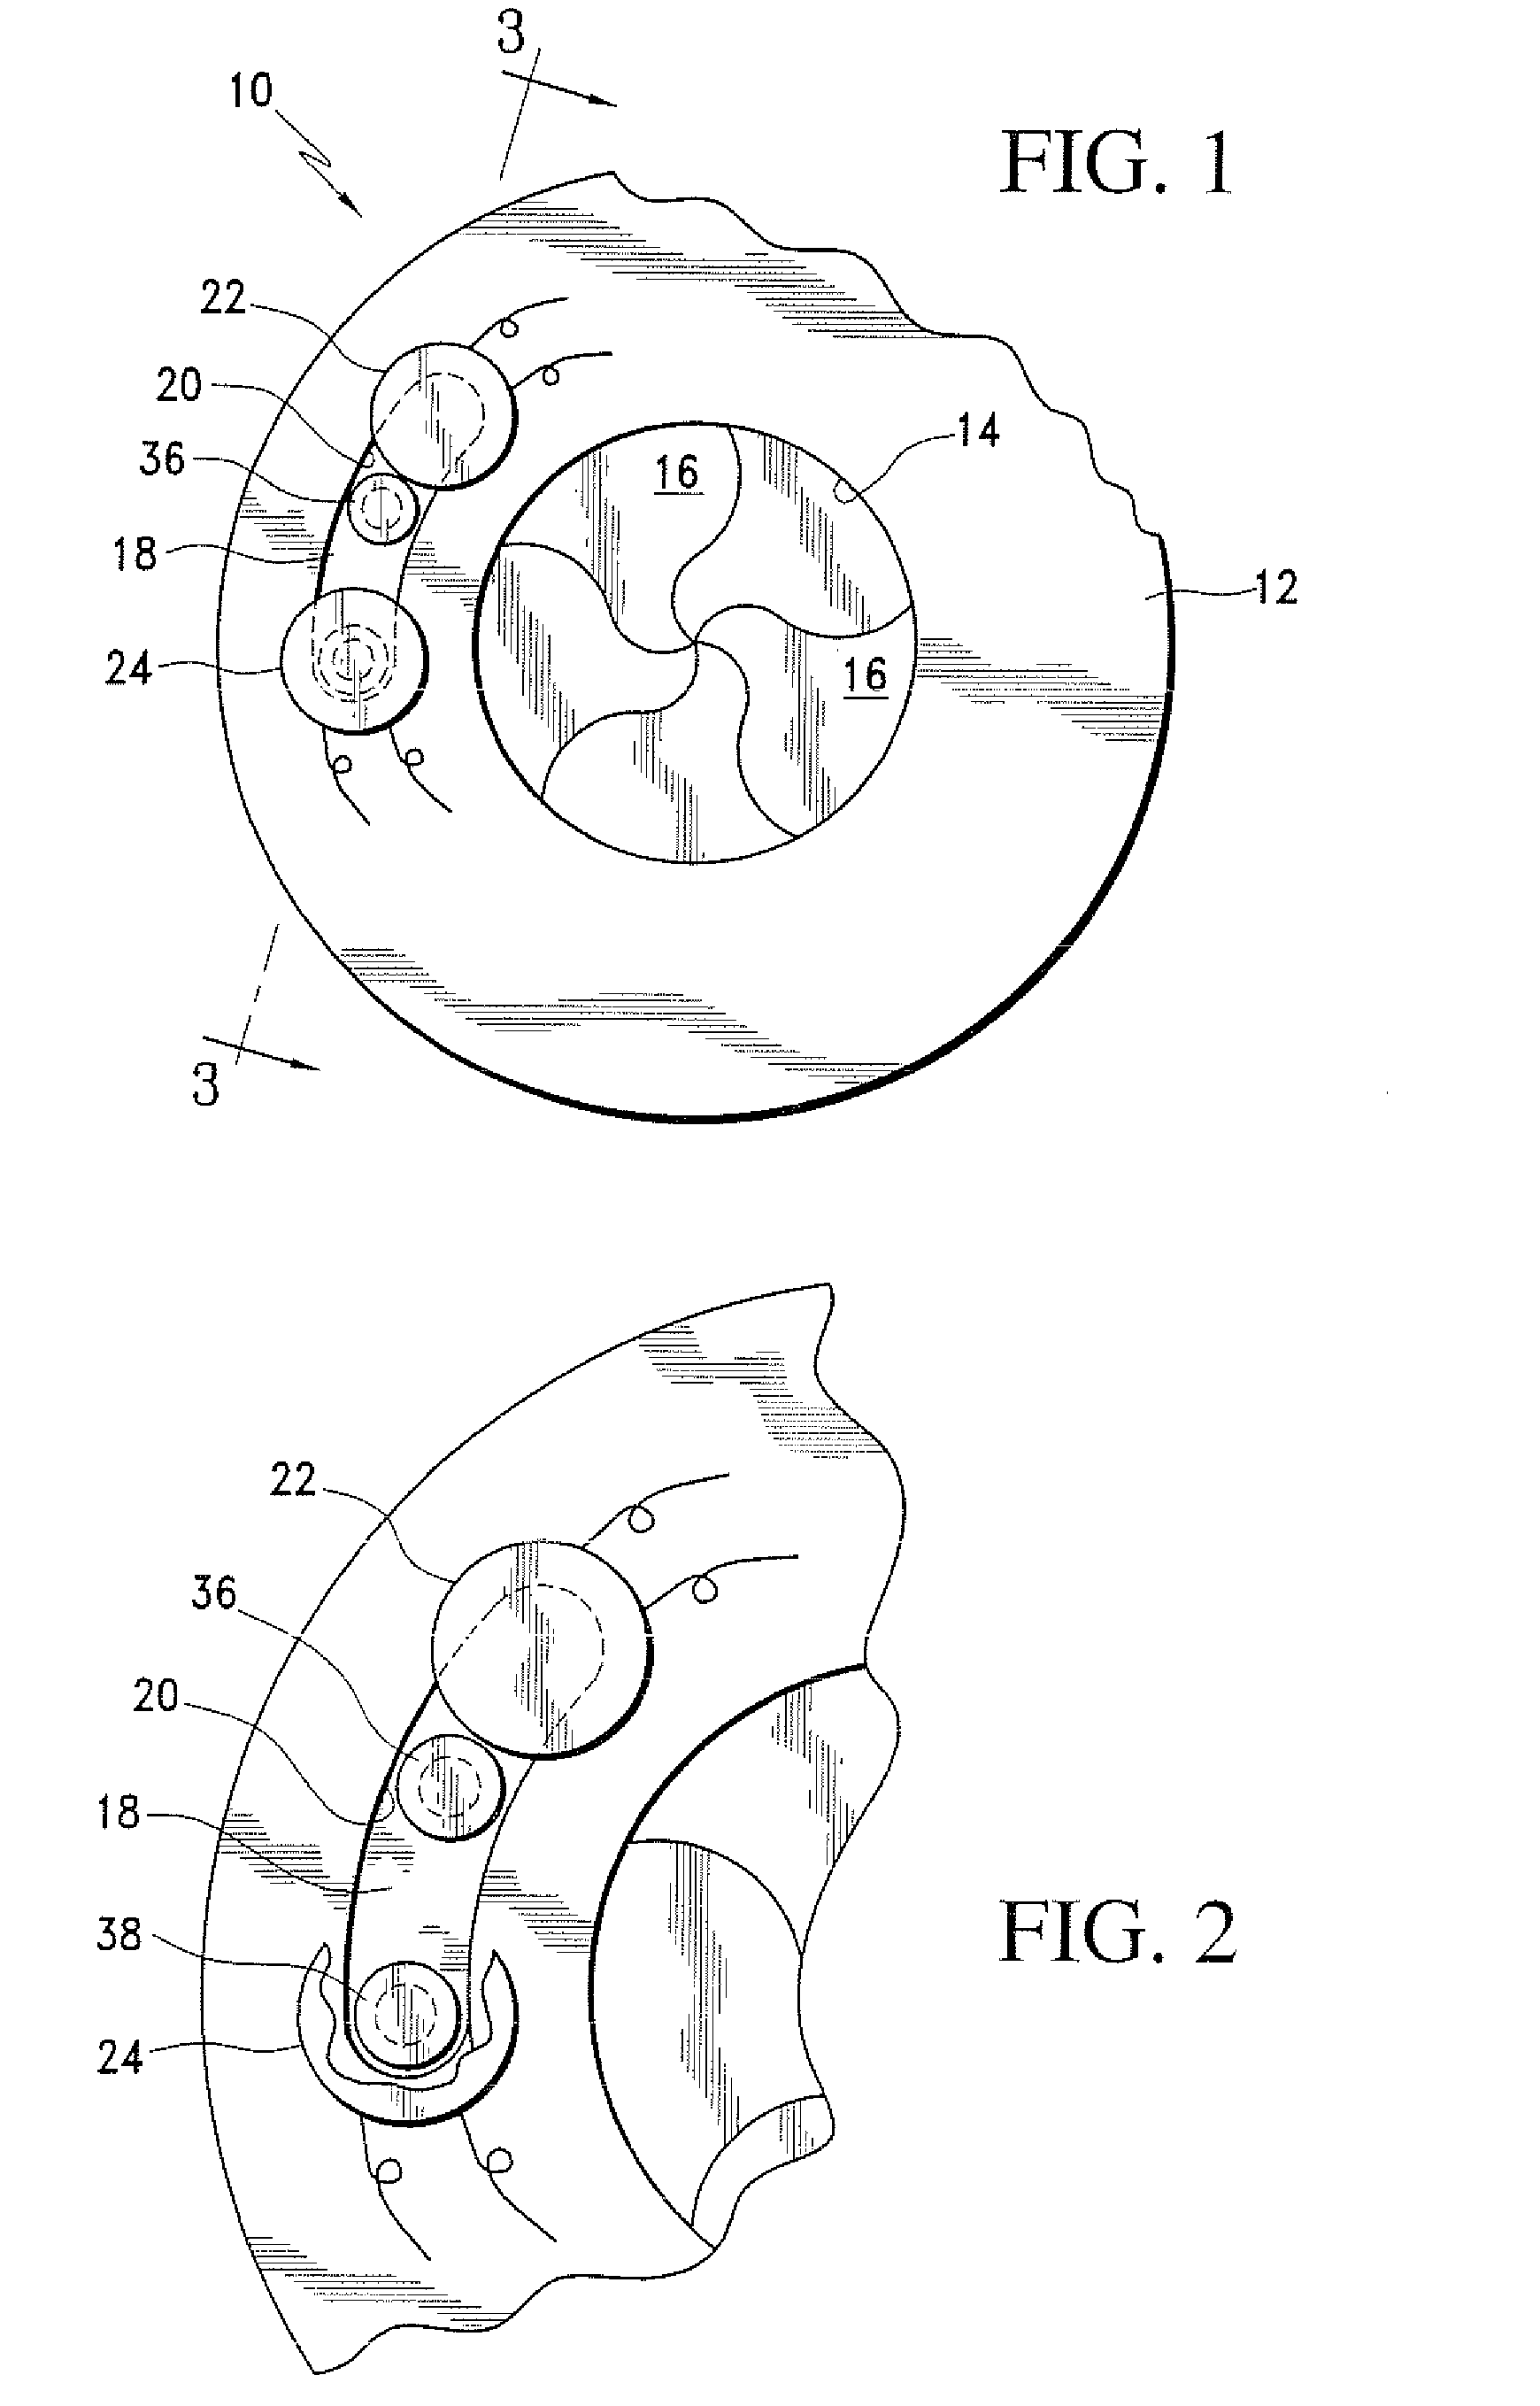 Non-contact shutter activation system and method